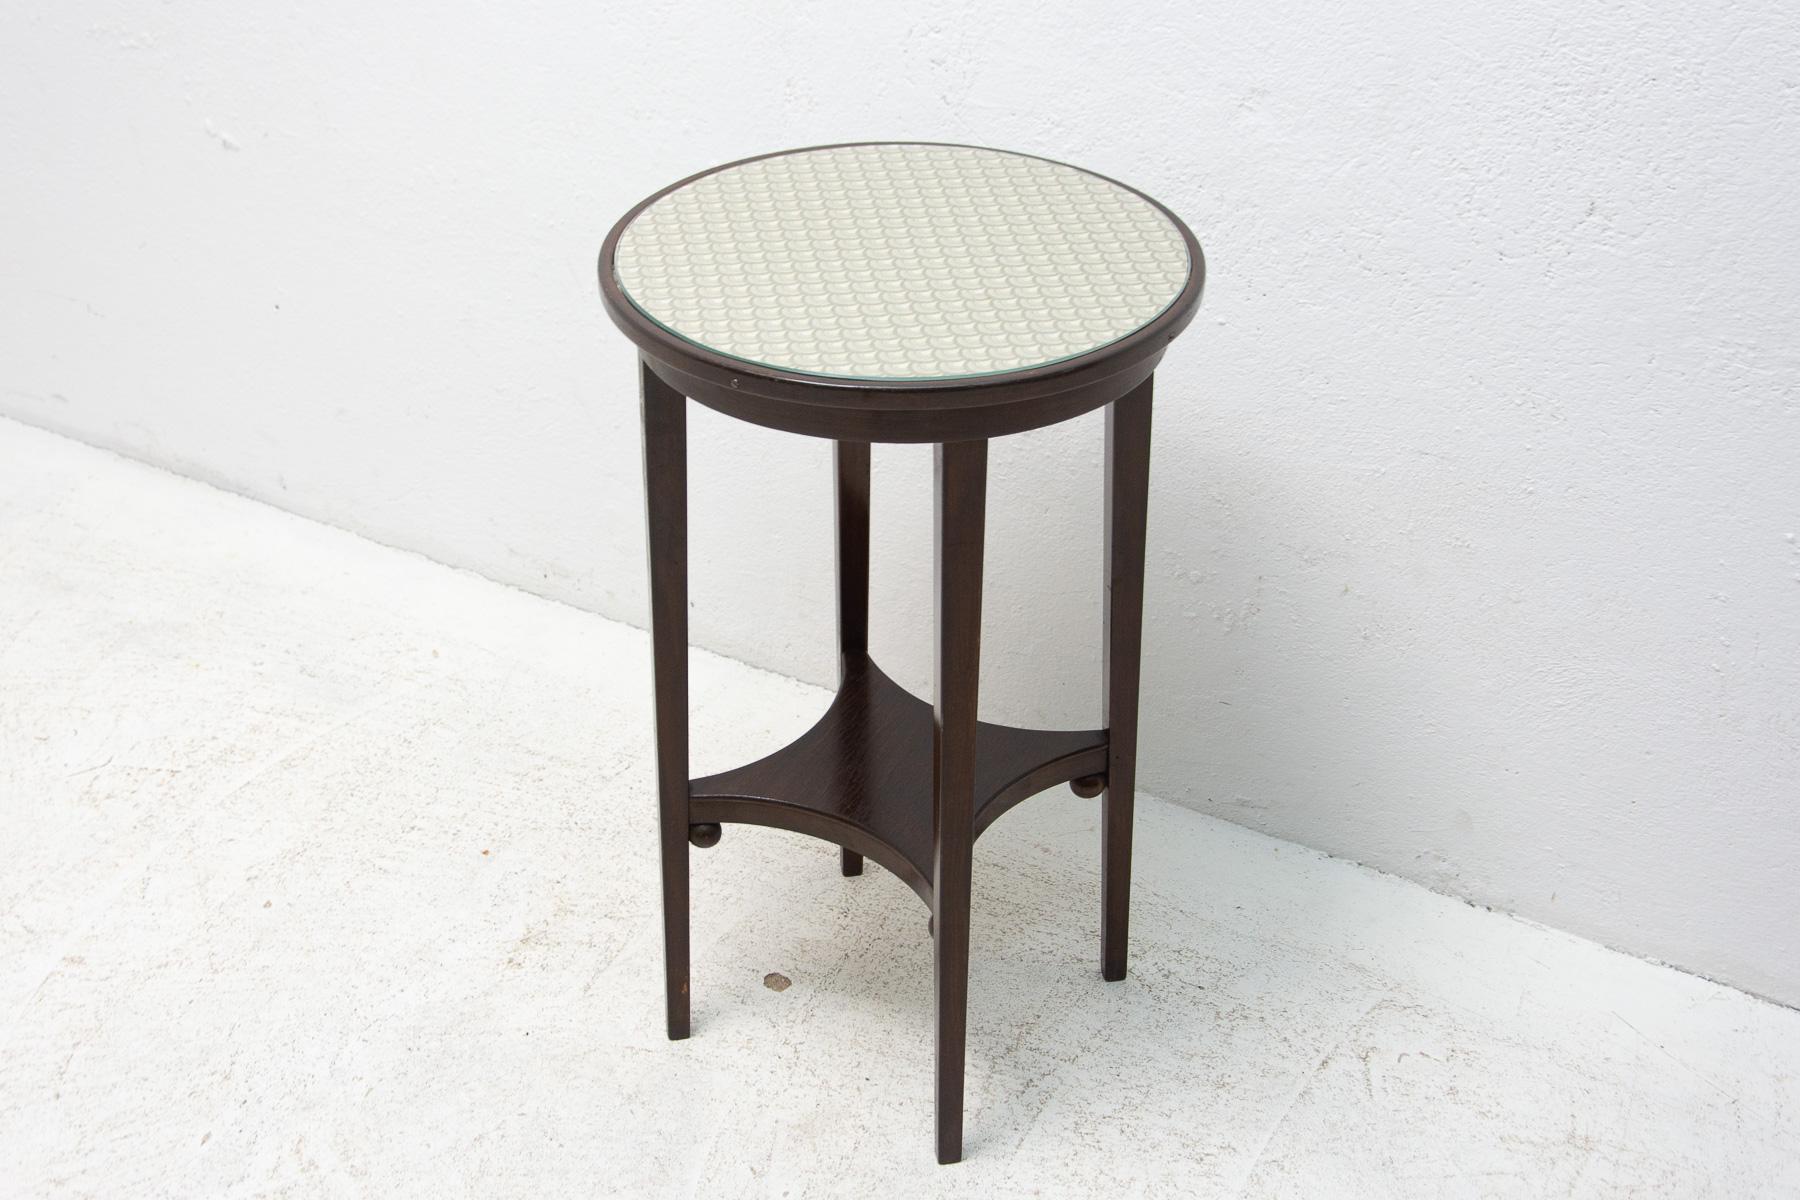 Side table designed by Josef Hoffmann, circa 1915. The table is made of beech stained wood, a new fabric in the Vienna Secession style is placed under the glass. The table is in very good condition, fully renovated.

Measures: height 71